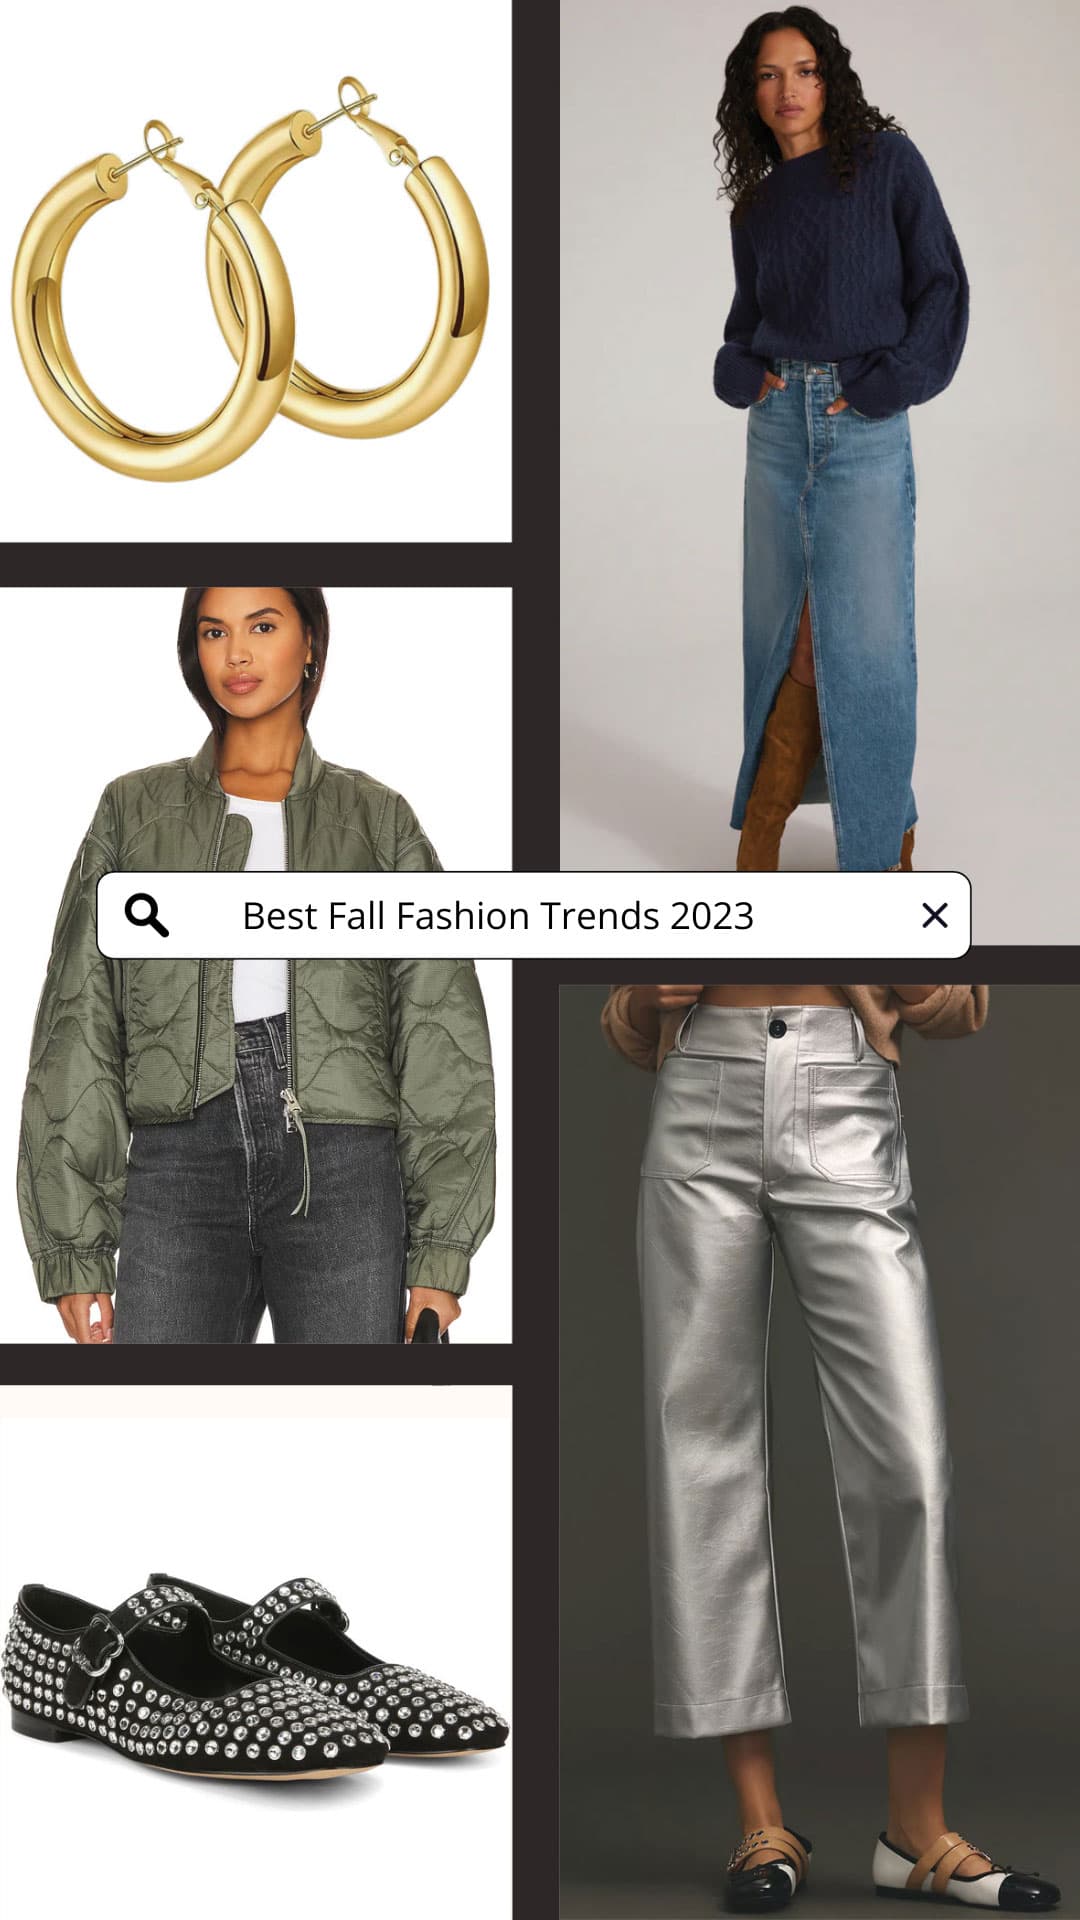 What fashion items are great investment pieces?